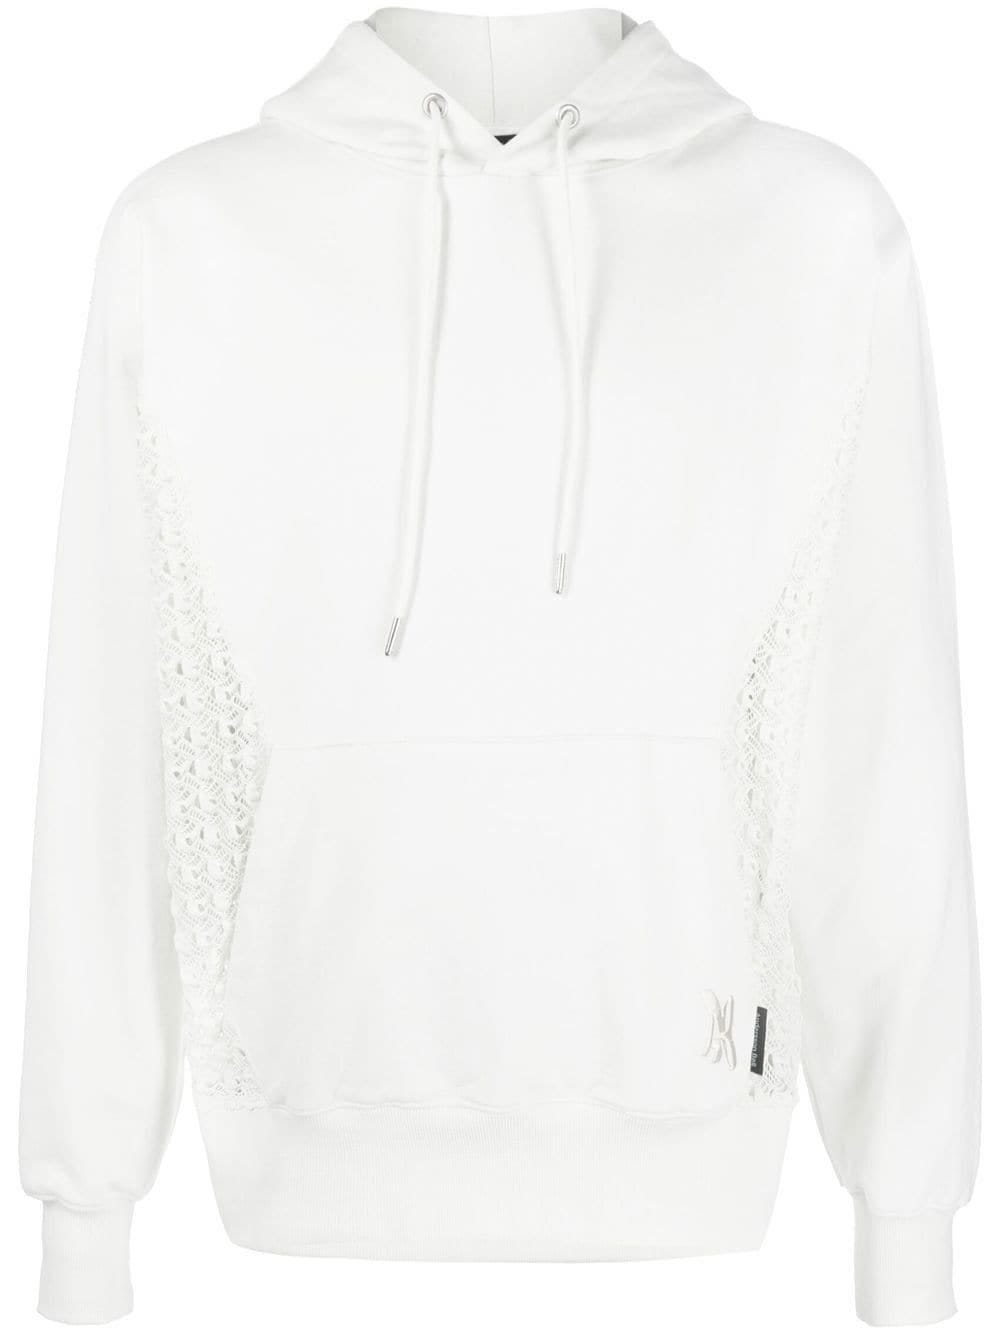 ANDERSSON BELL WHITE SWEATSHIRT WITH LACE INSERT